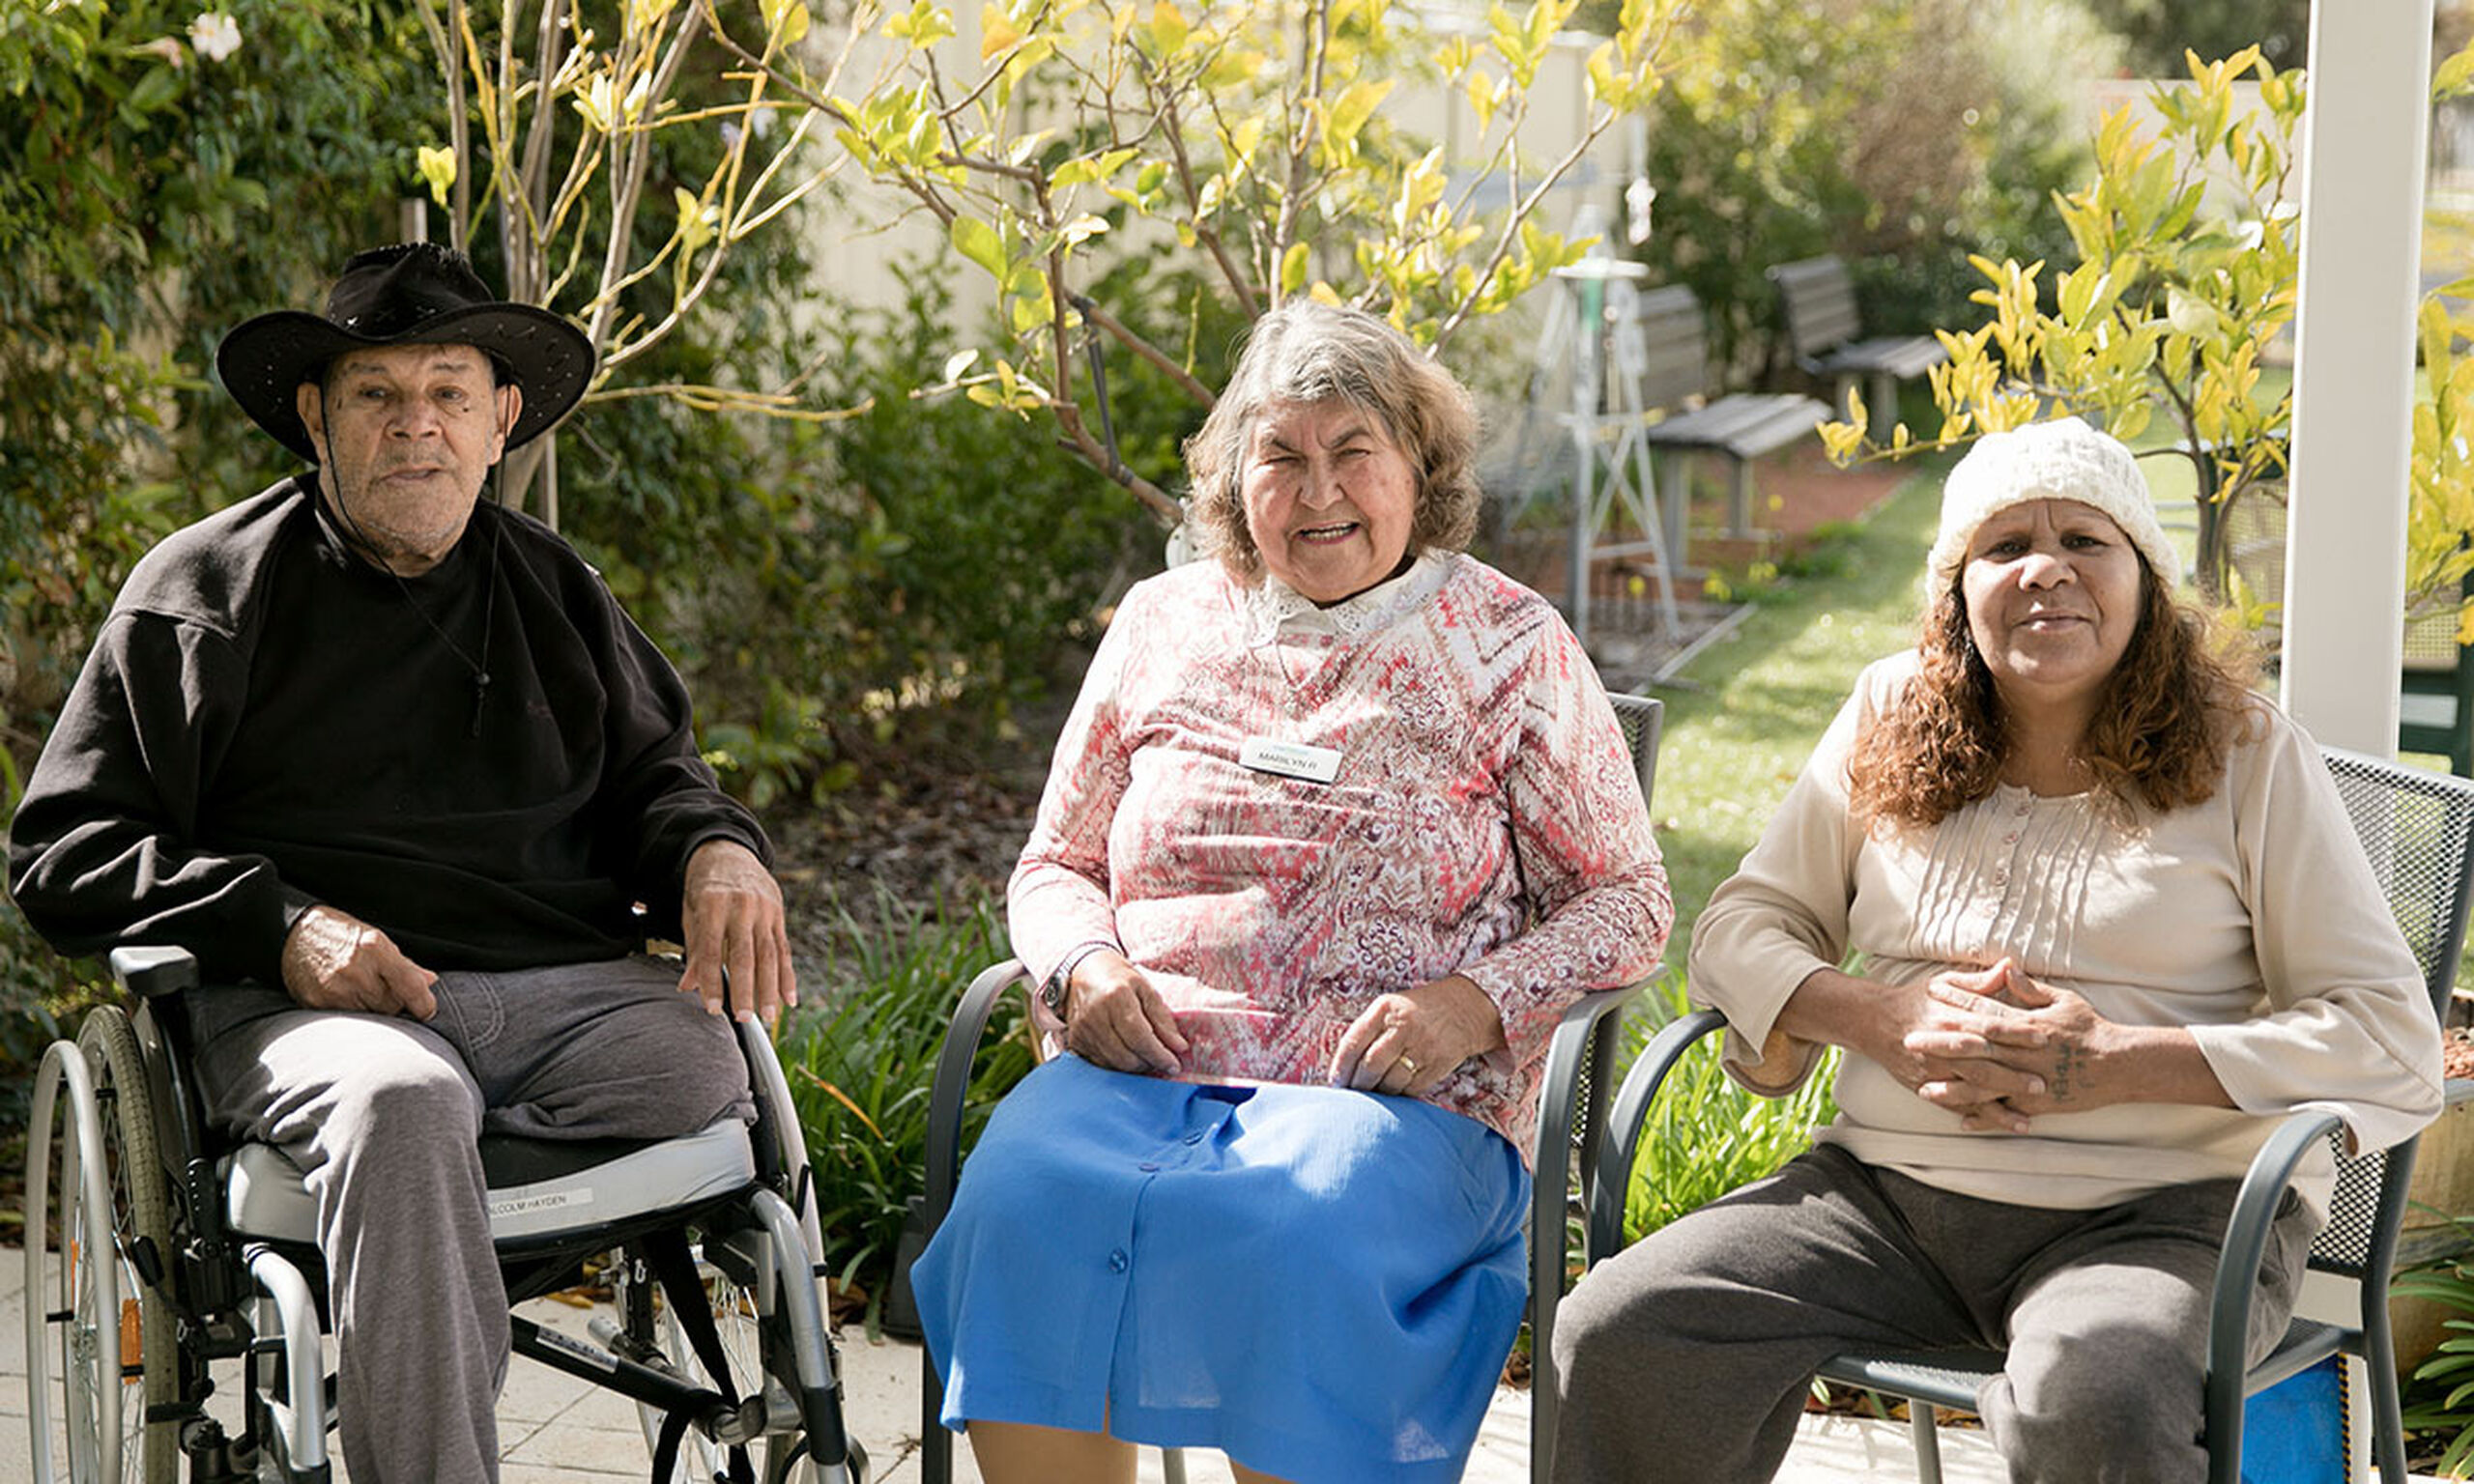 Connections to the land for local aged care volunteer